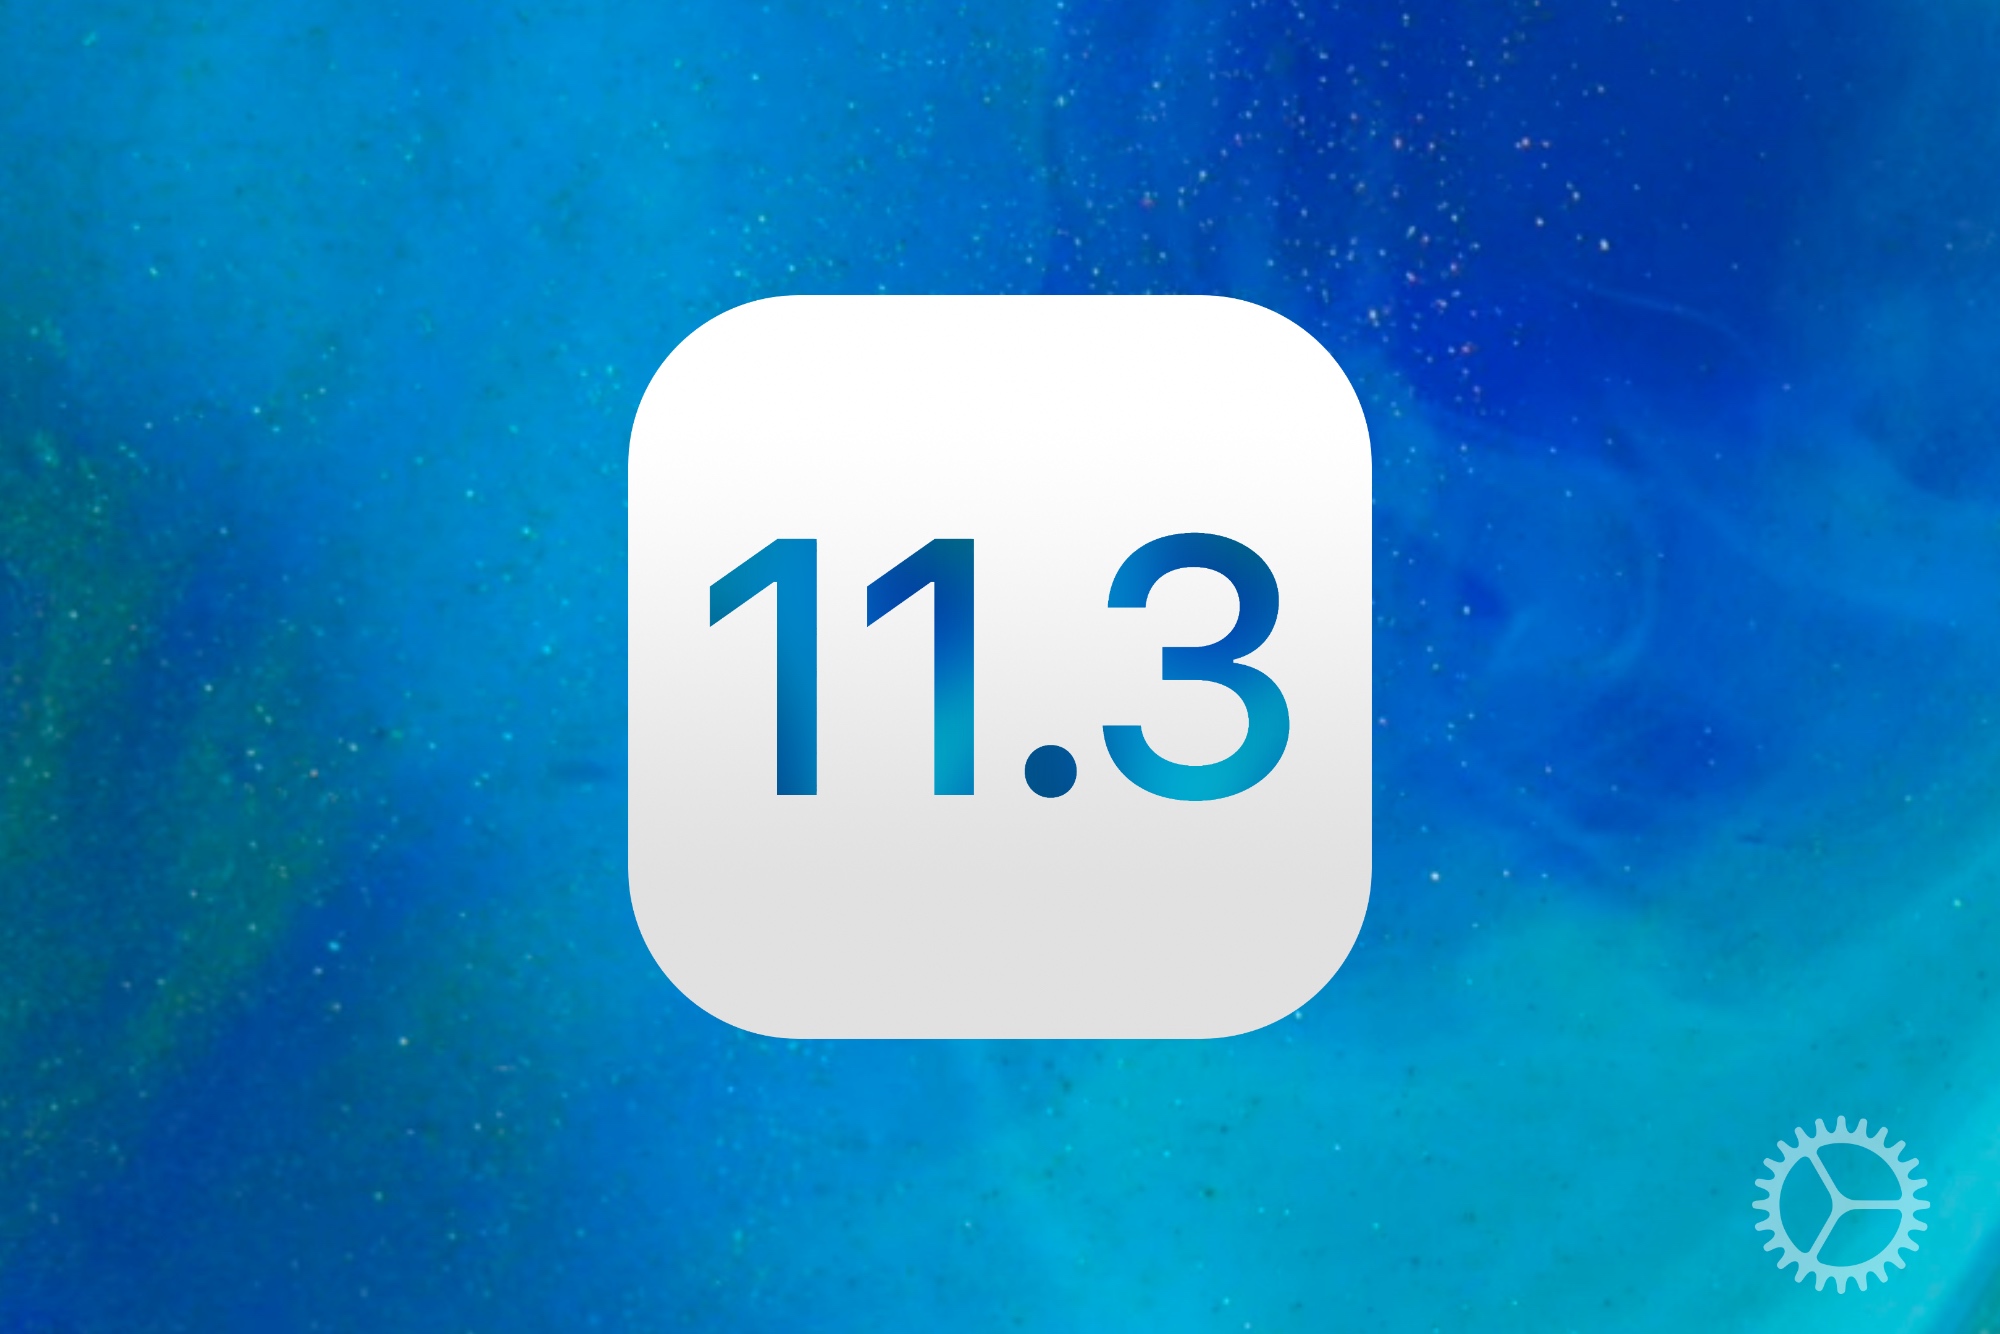 iOS 11.3 Final Version is Available to Download on 3uTools